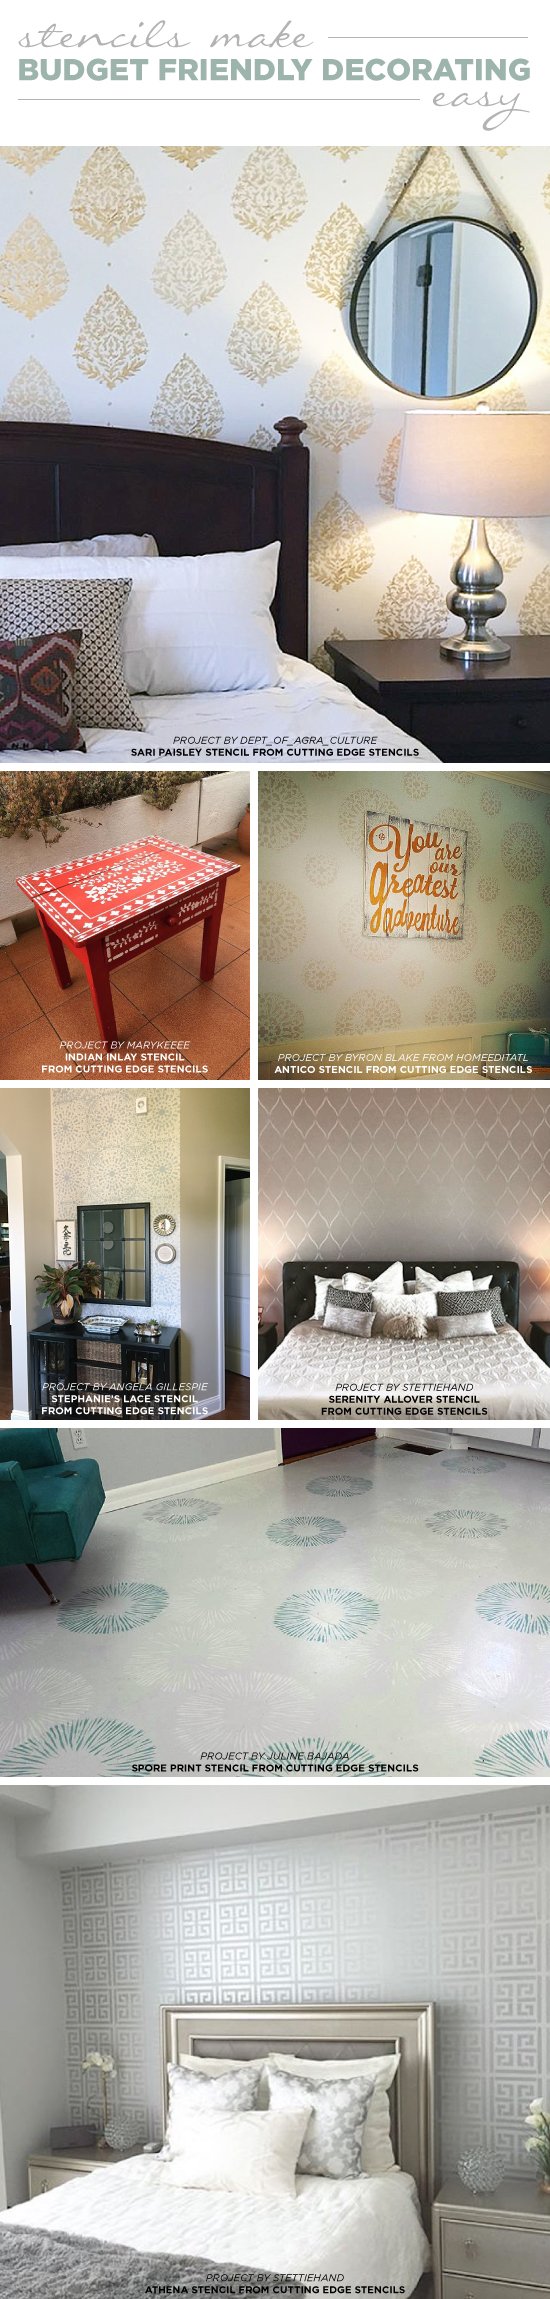 Cutting Edge Stencils shares DIY home decorating ideas using wall and craft stencil patterns. http://www.cuttingedgestencils.com/wall-stencils-stencil-designs.html